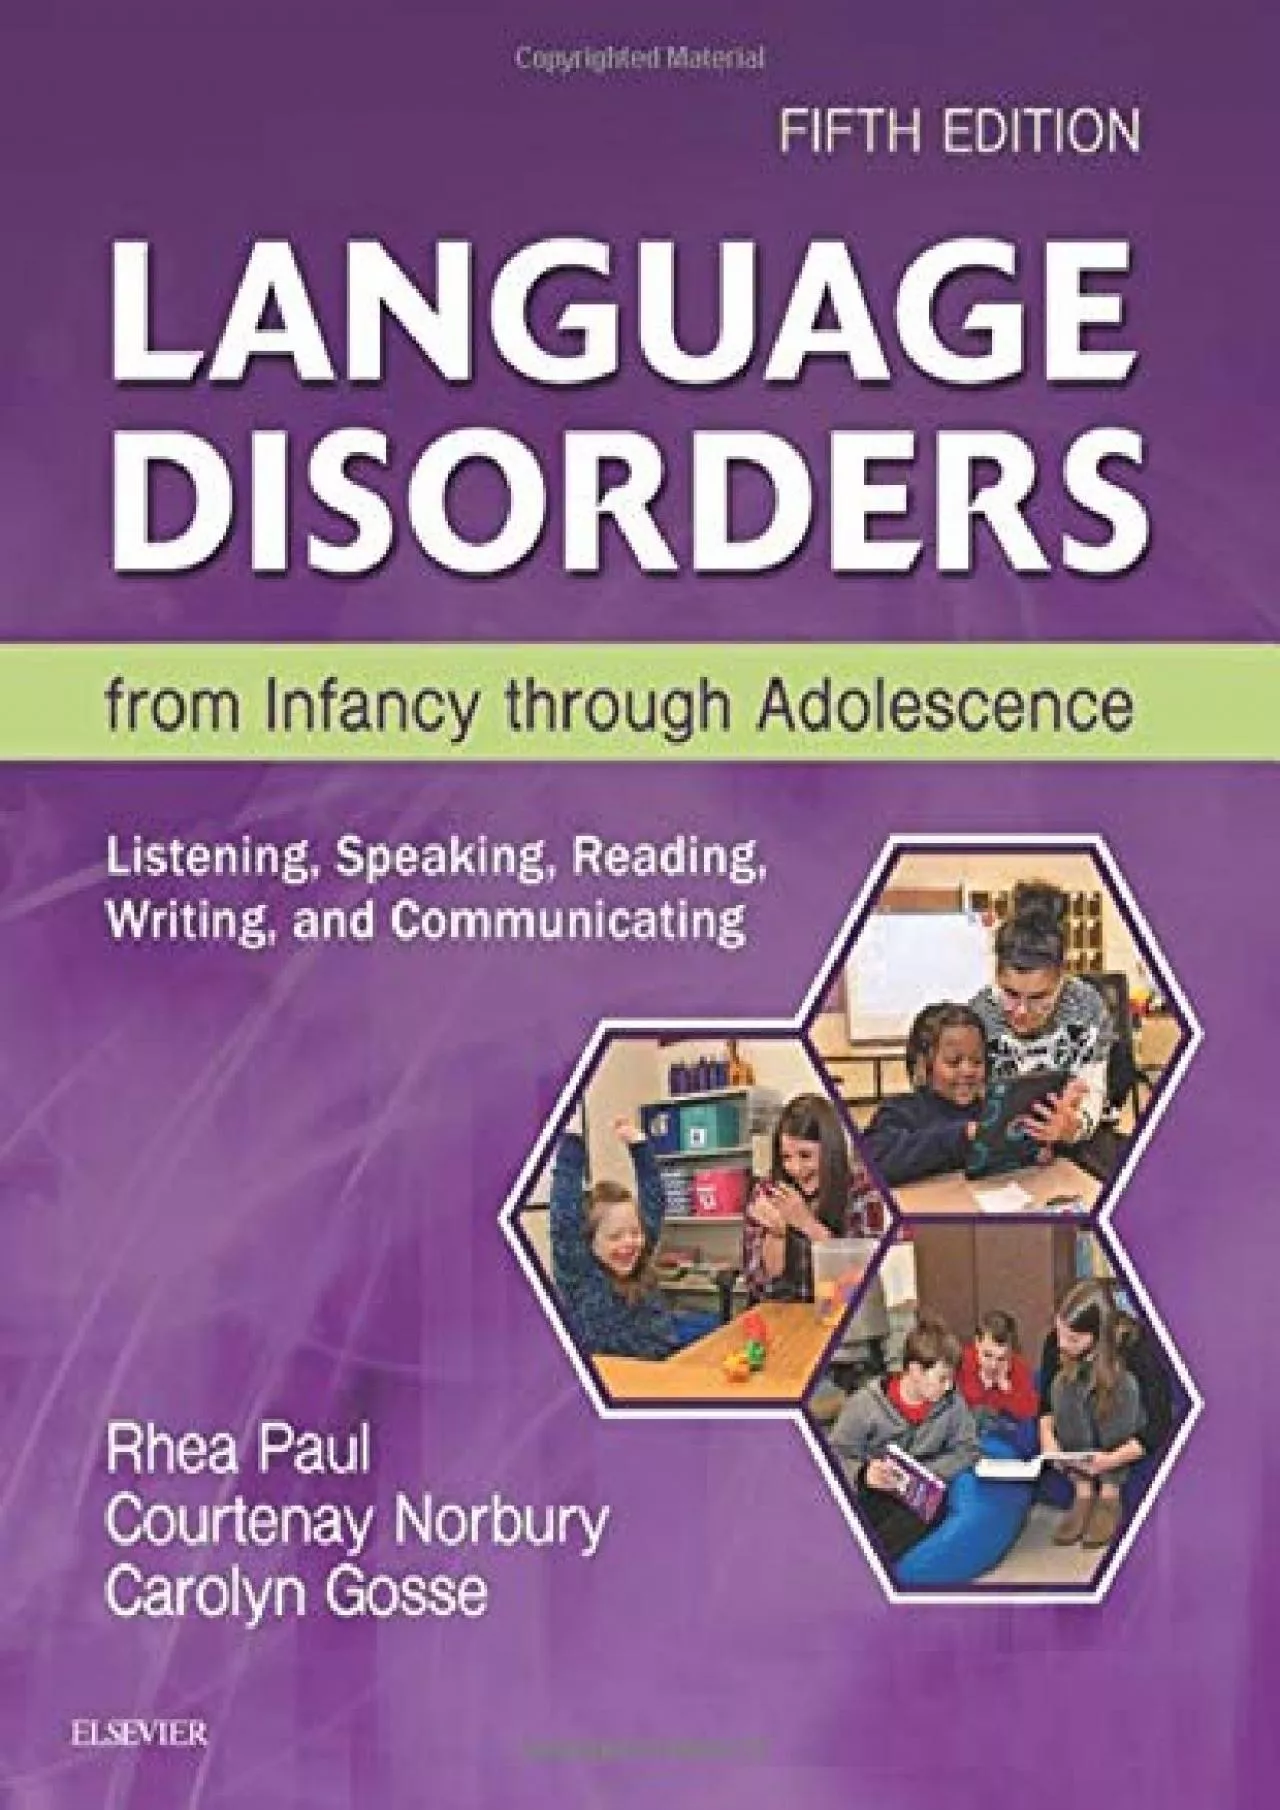 (BOOK)-Language Disorders from Infancy through Adolescence: Listening, Speaking, Reading,